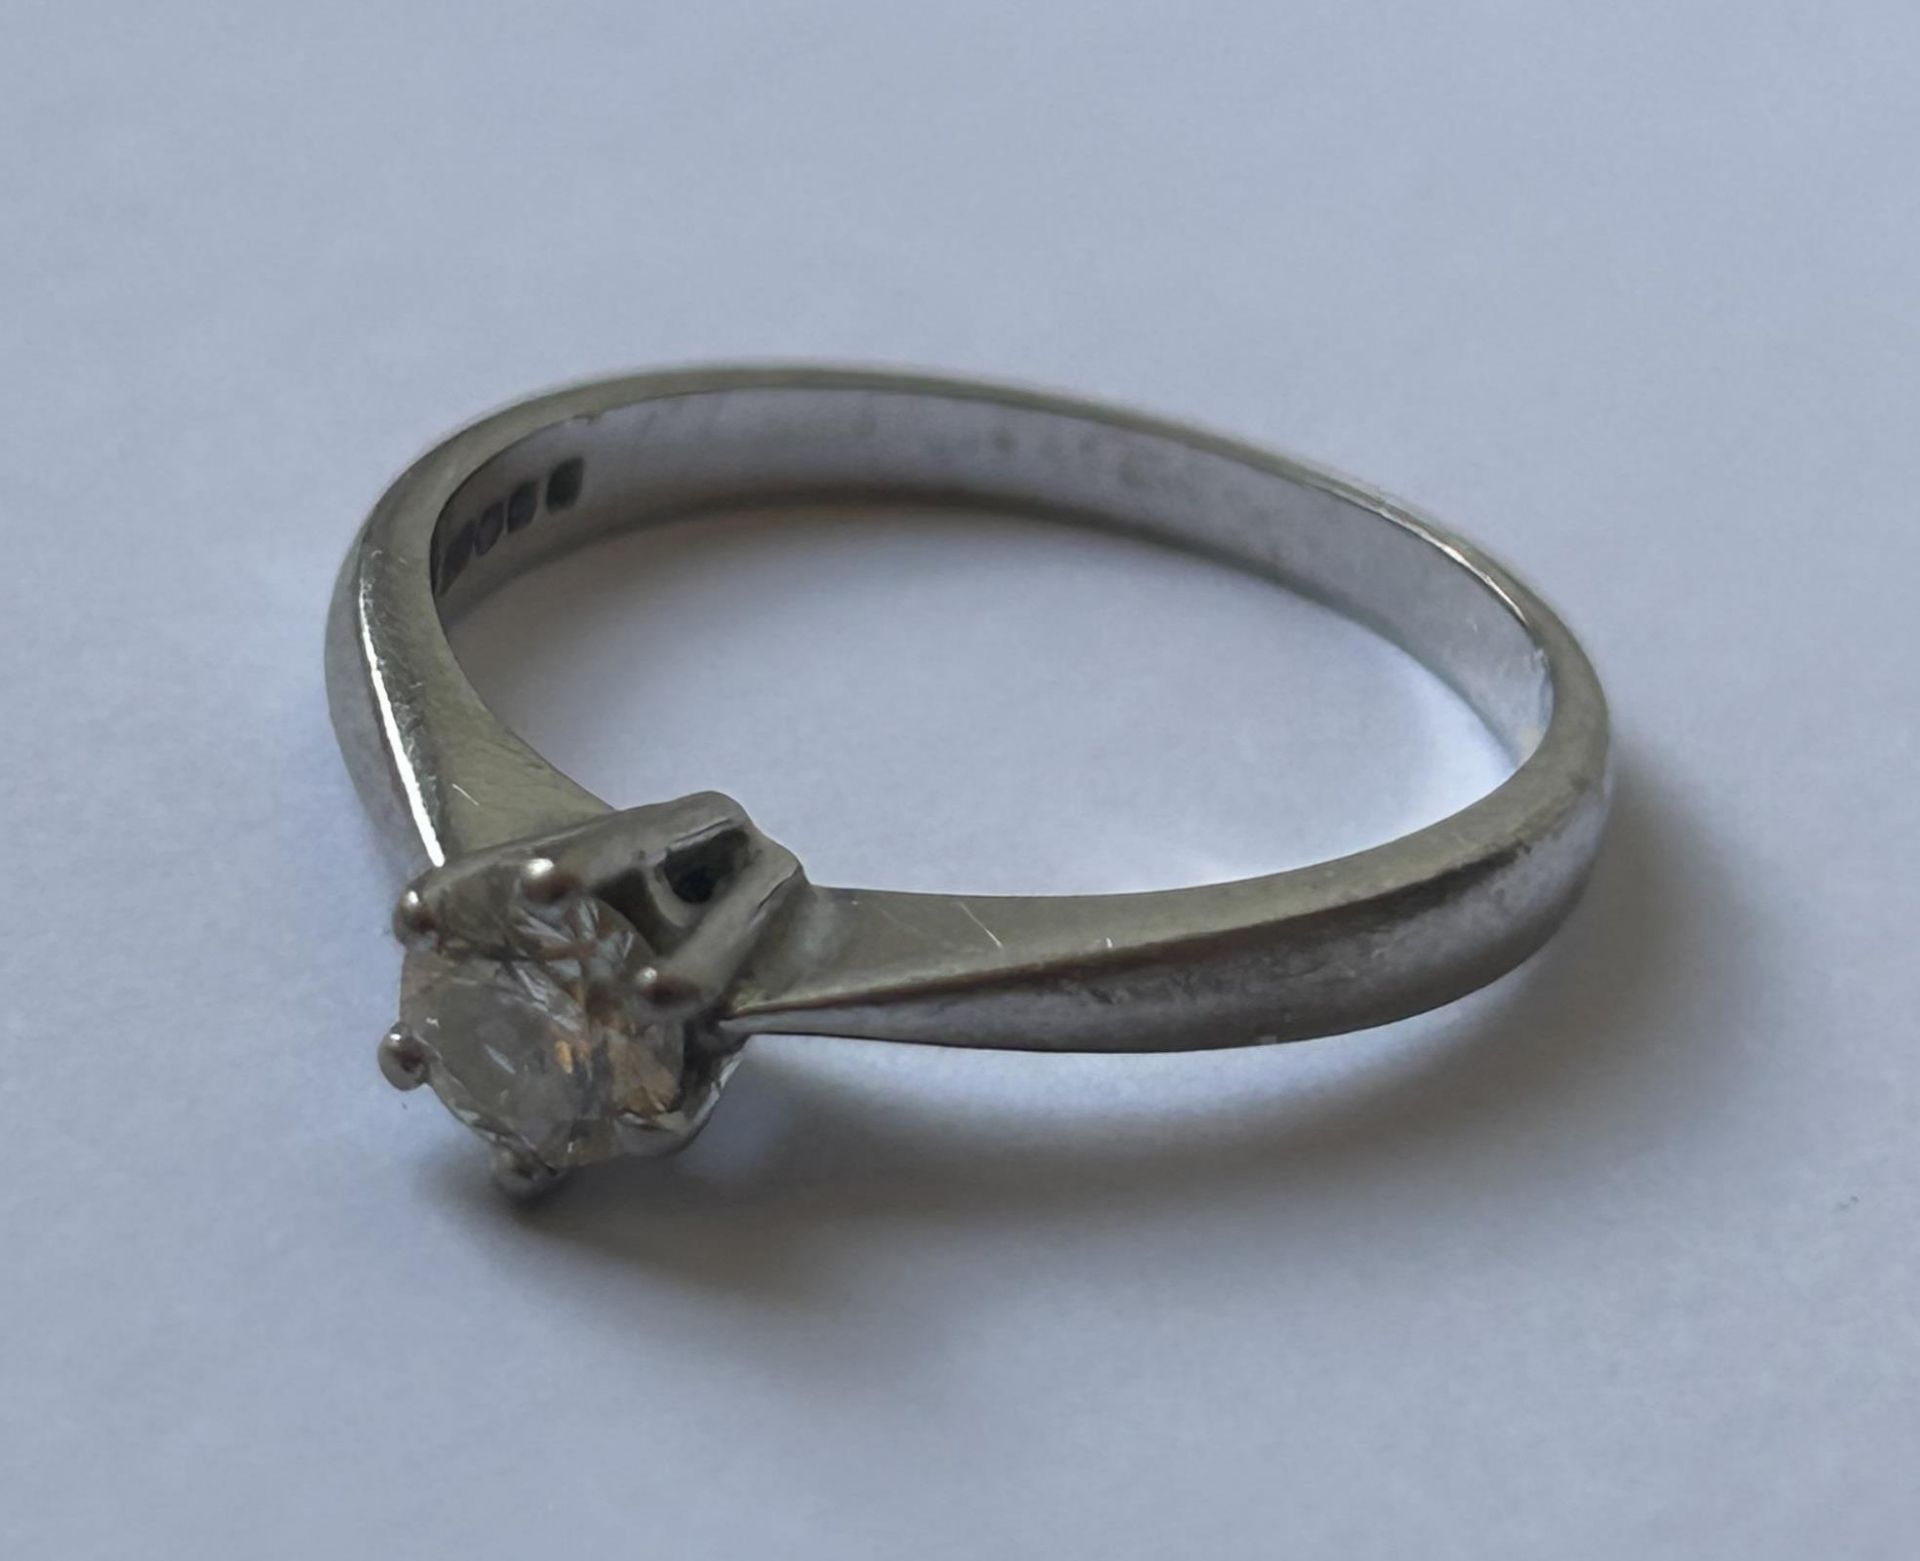 AN 18 CARAT WHITE GOLD DIAMOND SOLITAIRE RING WITH A 0.33 CARAT DIAMOND WITH A 'VERY GOOD' QUALITY E